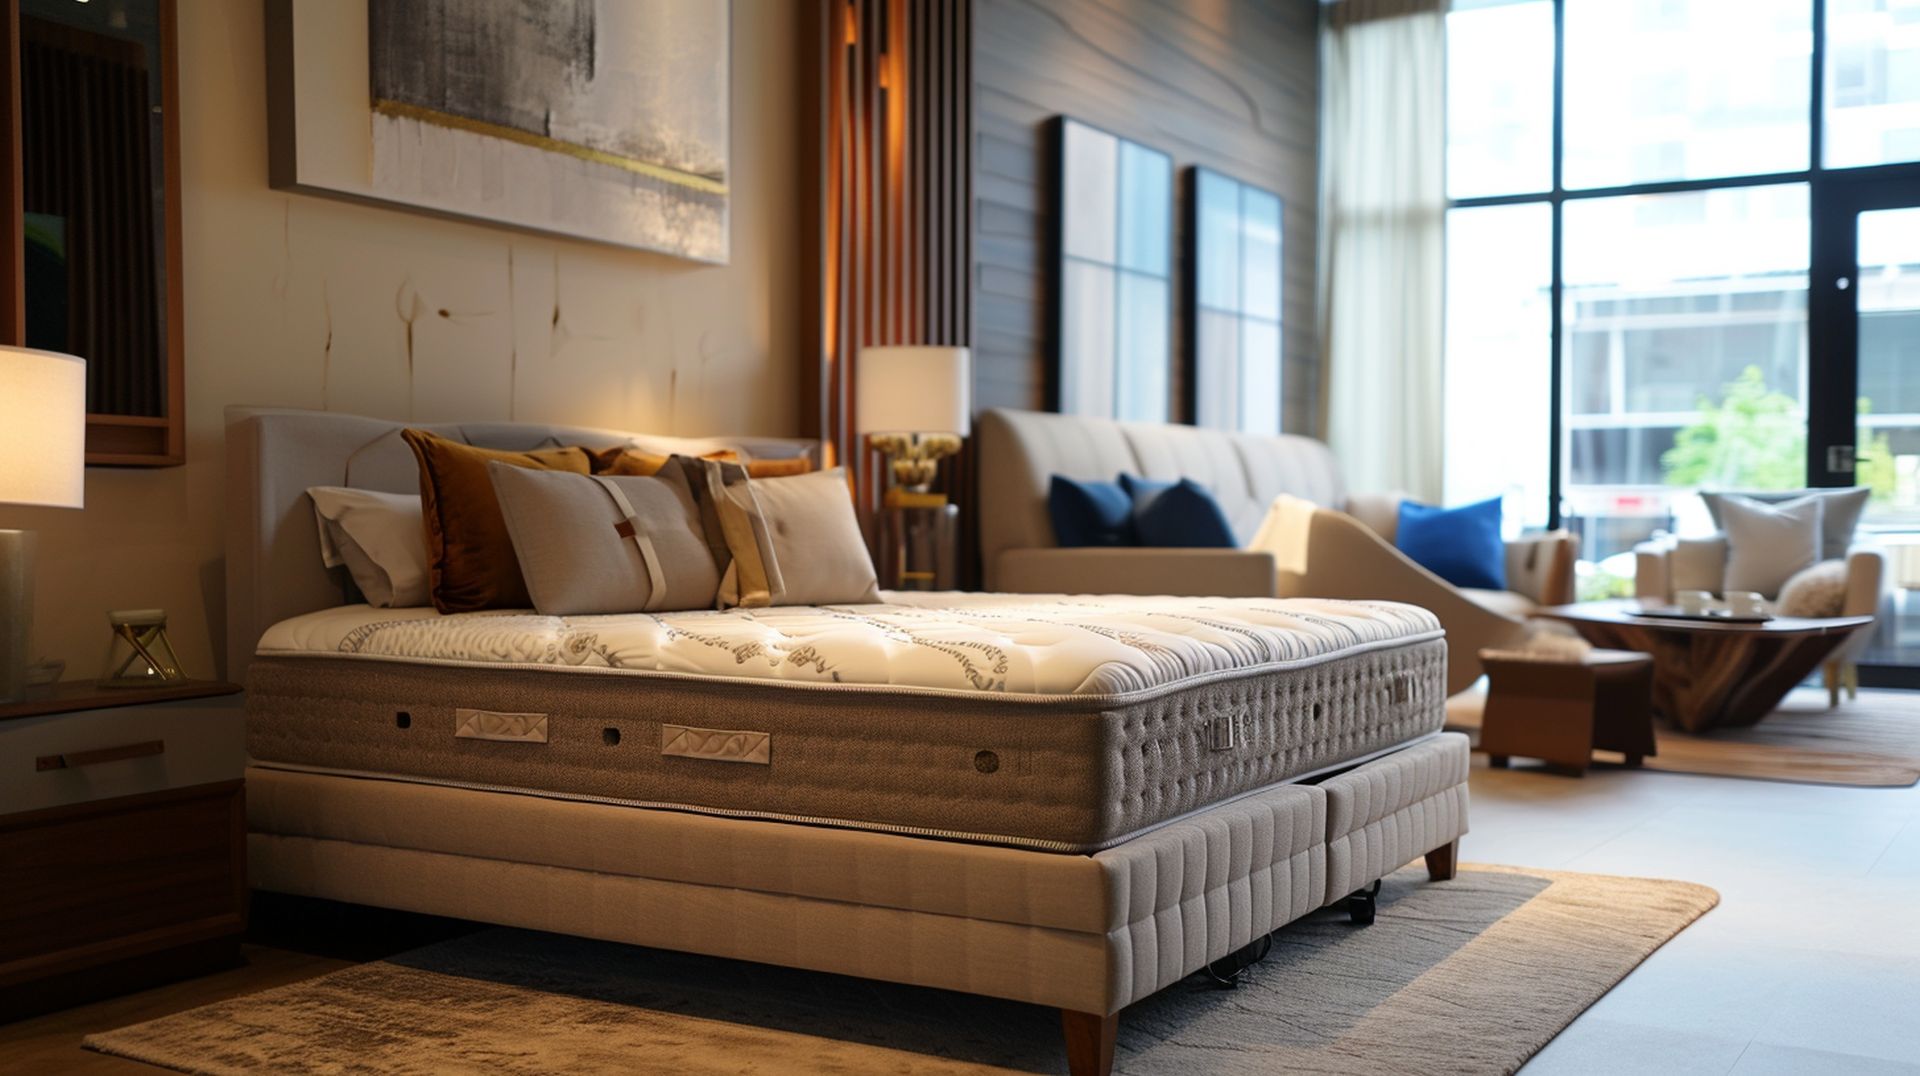 If you're looking for a new bed, mattress stores in Worcester offer the best customer and delivery service, financing, and warranties in Massachusetts